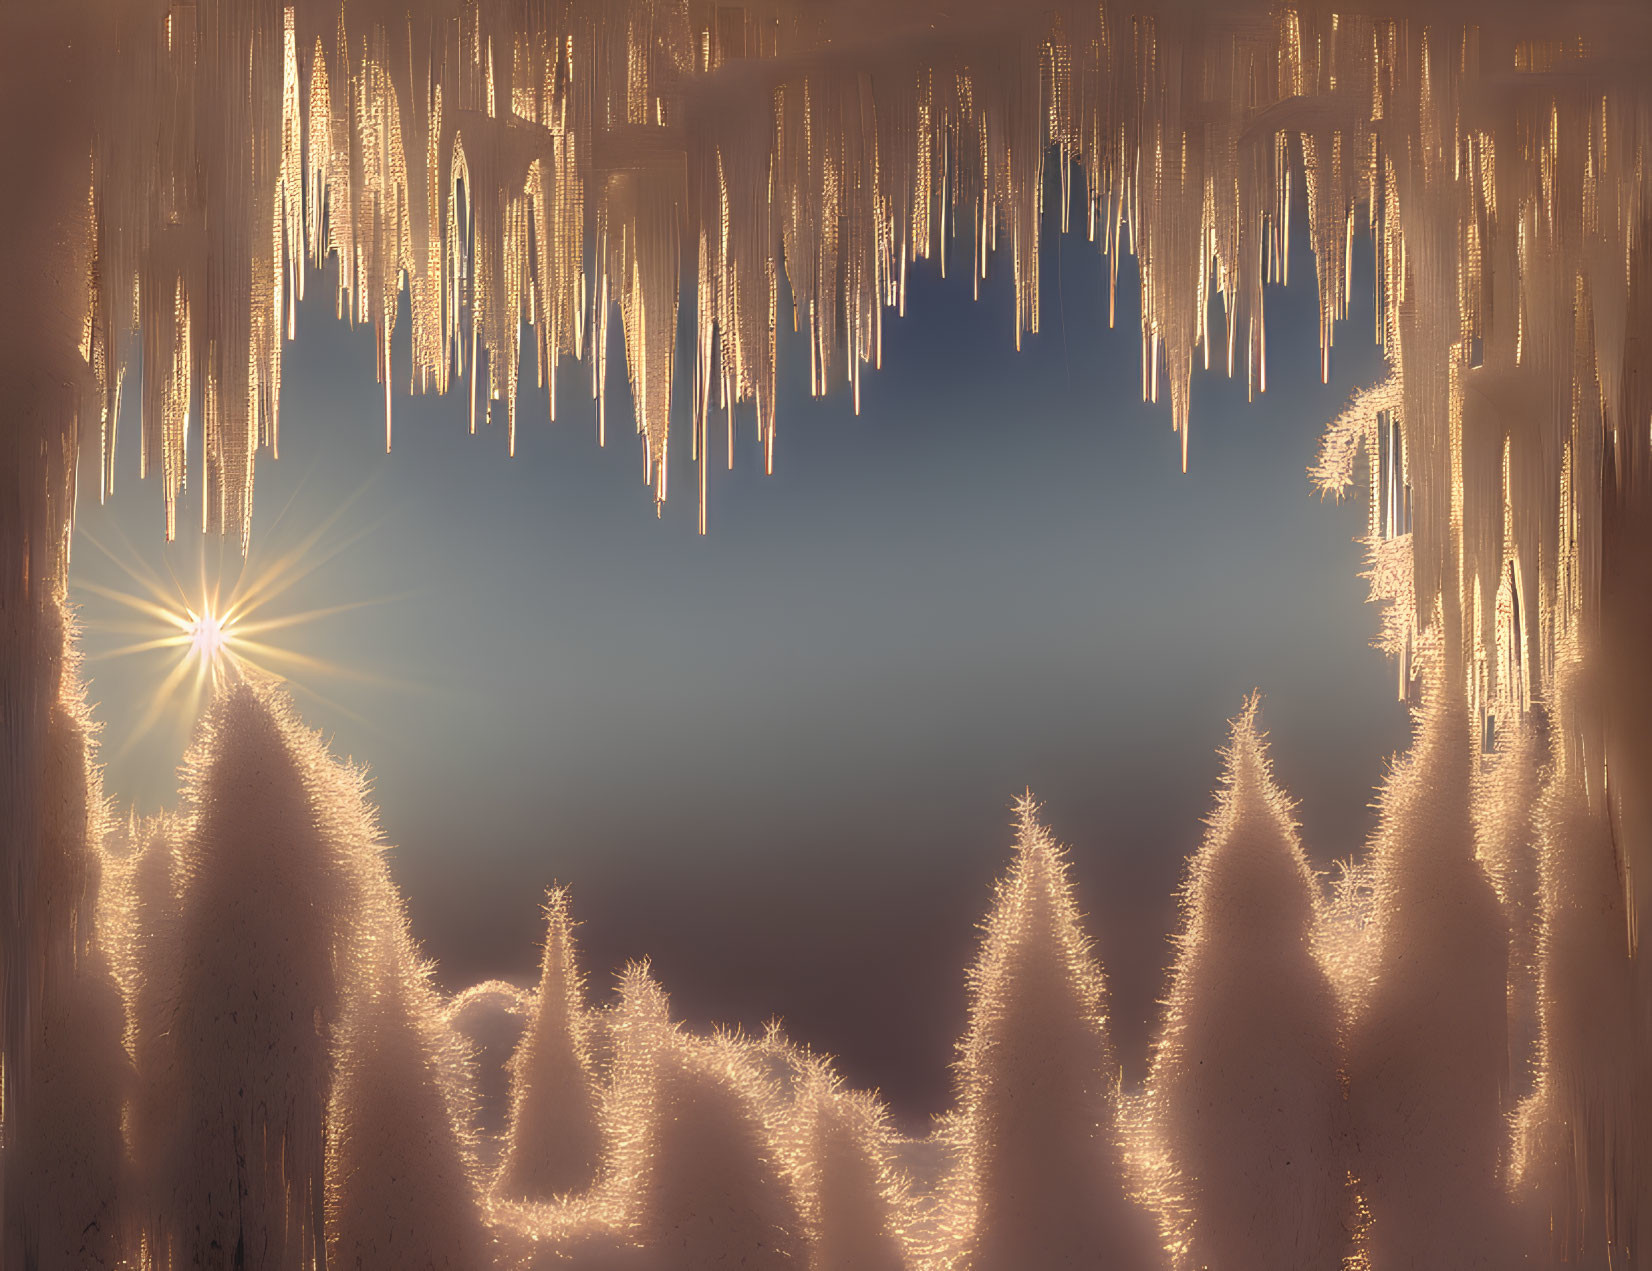 Winter sunrise scene with icicles, snow-covered fir trees, and warm golden light.